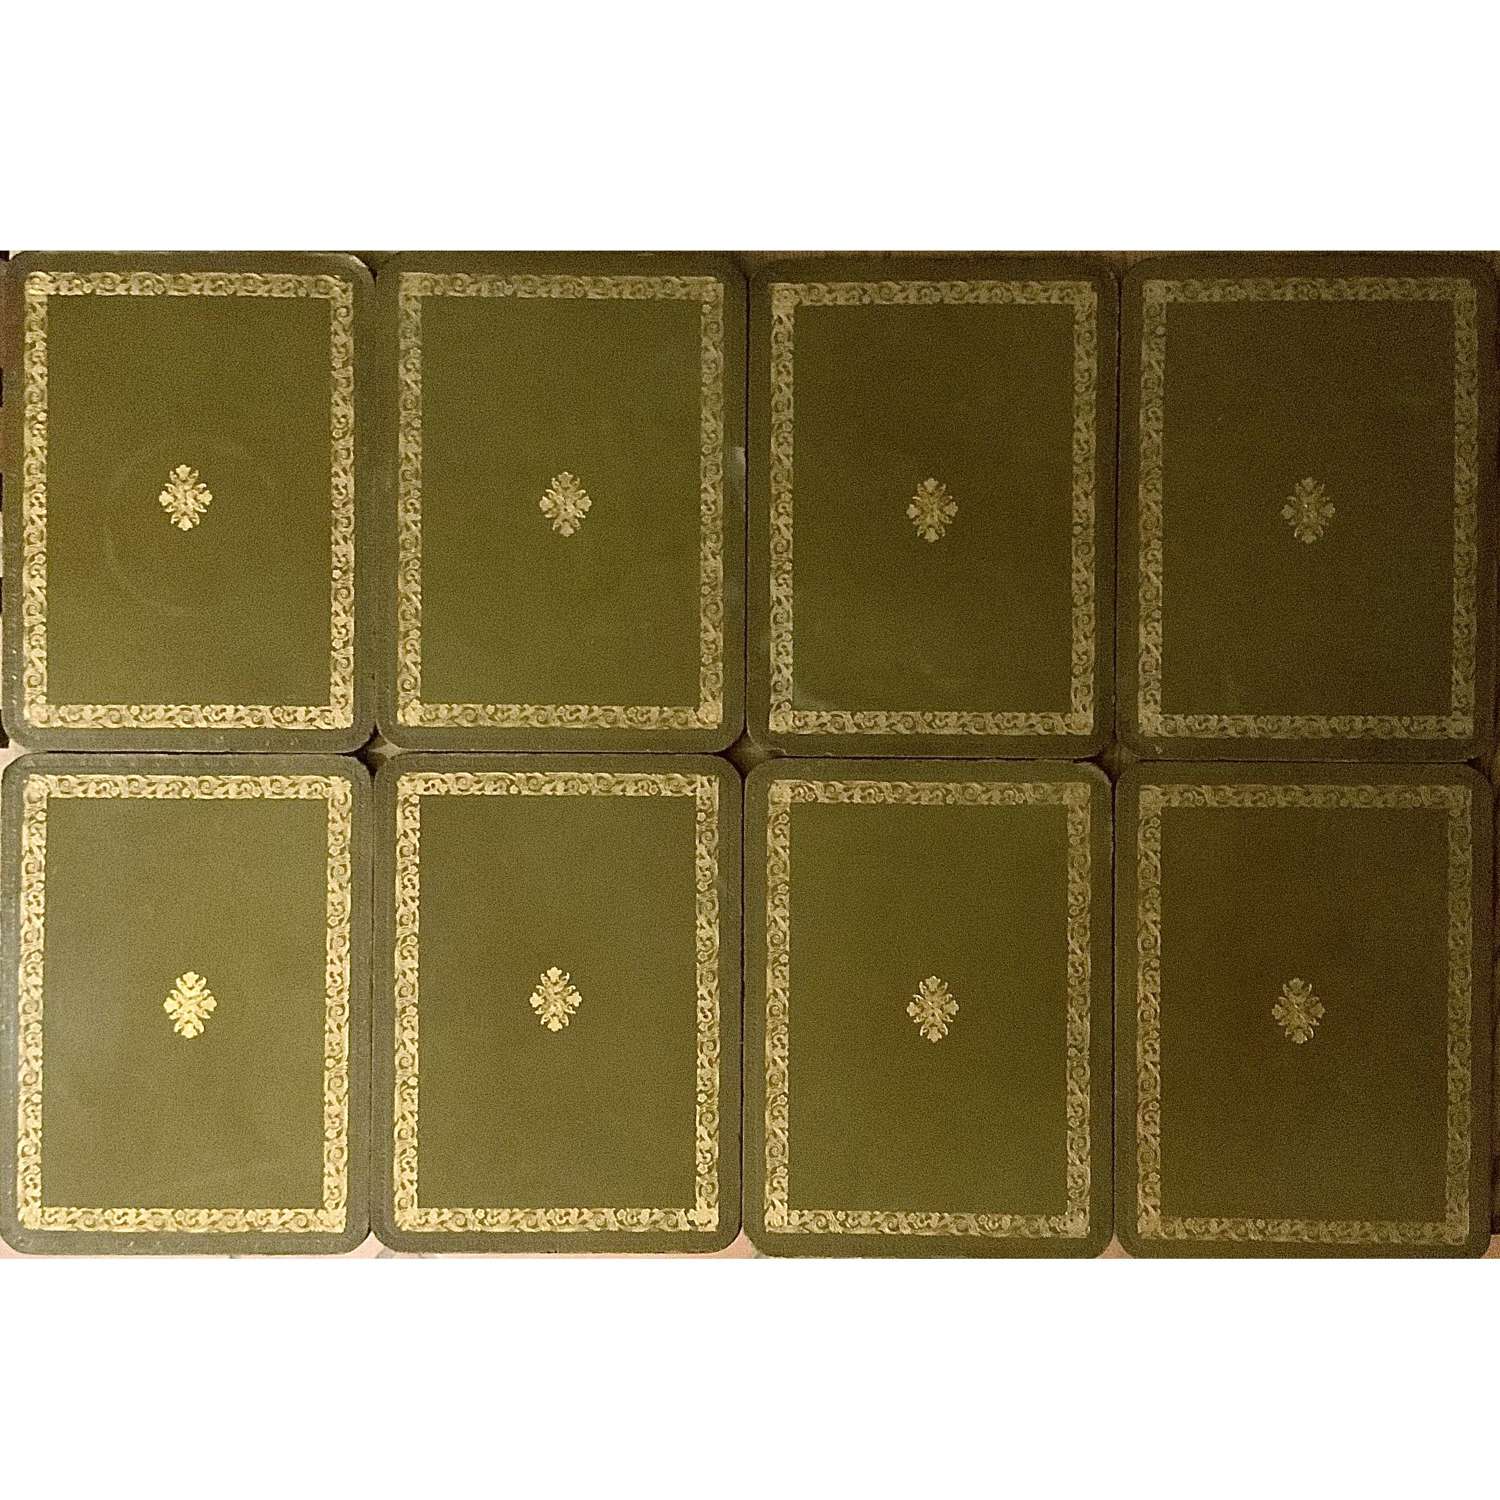 A Set of Eight (8) Vintage Tooled Olive Green Leather Table Place Mats